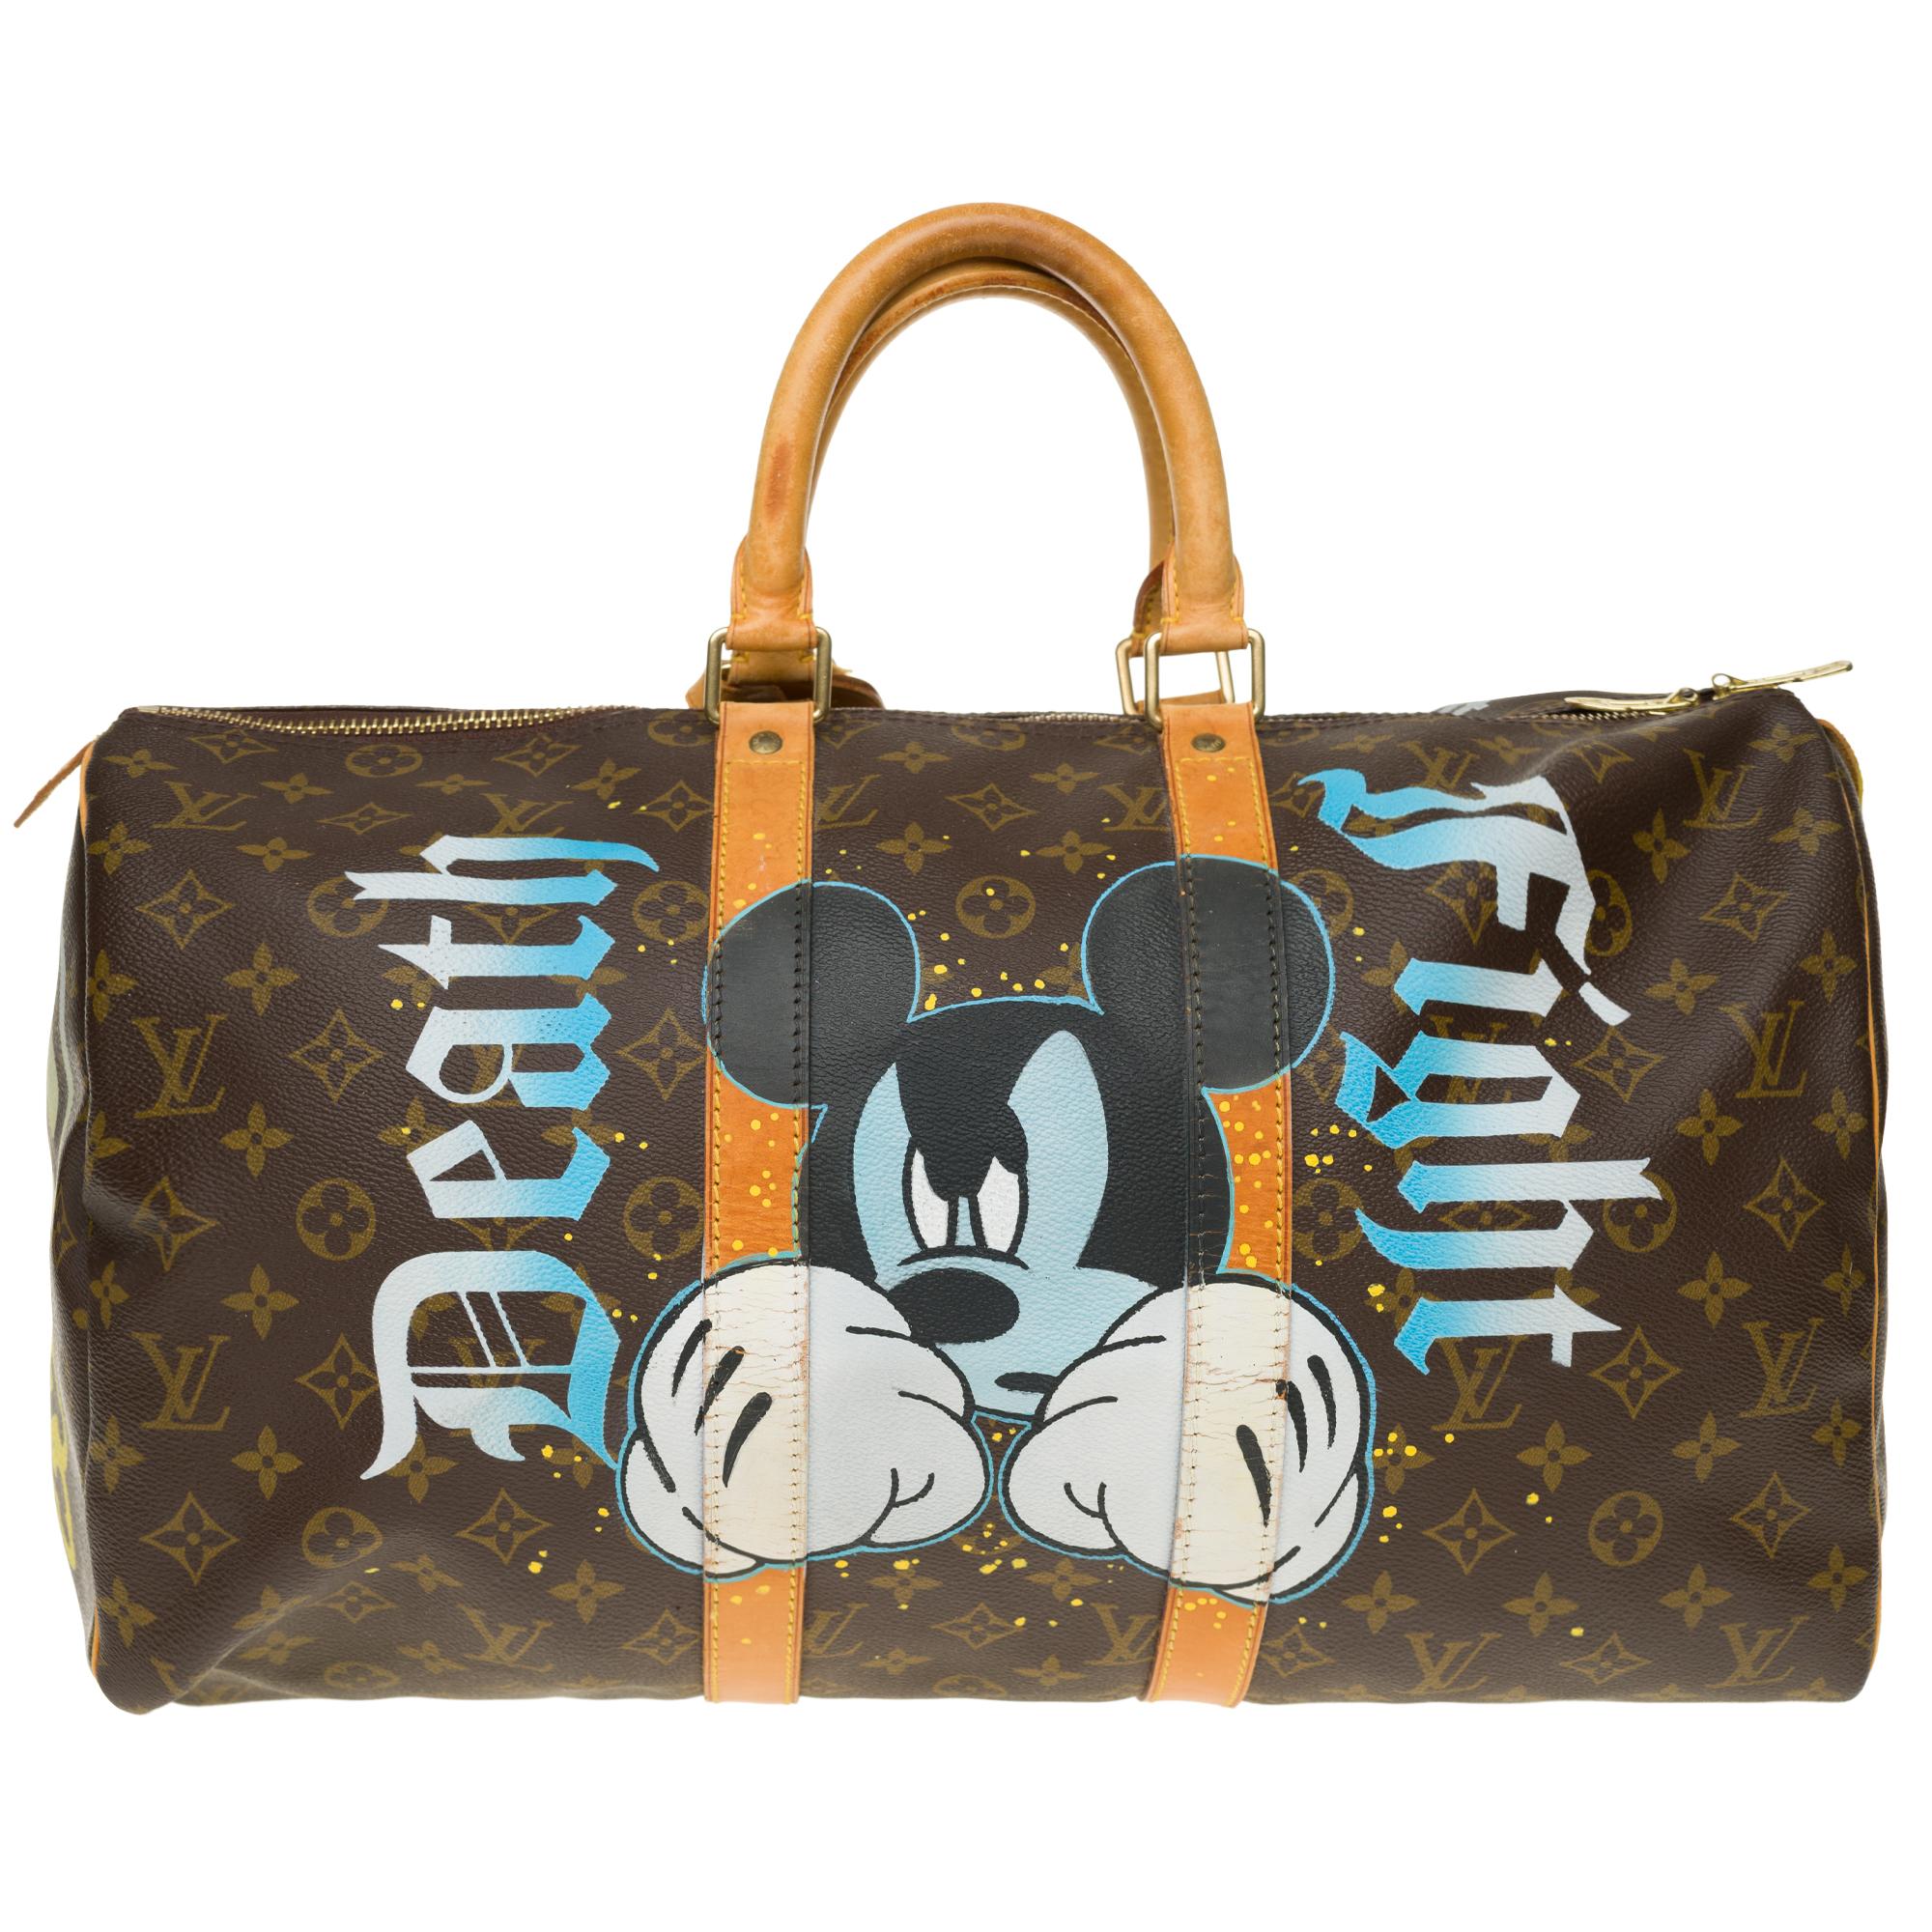 Superb travel bag Louis Vuitton Keepall 45 cm in Monogram canvas customized by the trendy artist of Street Art Patbo on the theme 